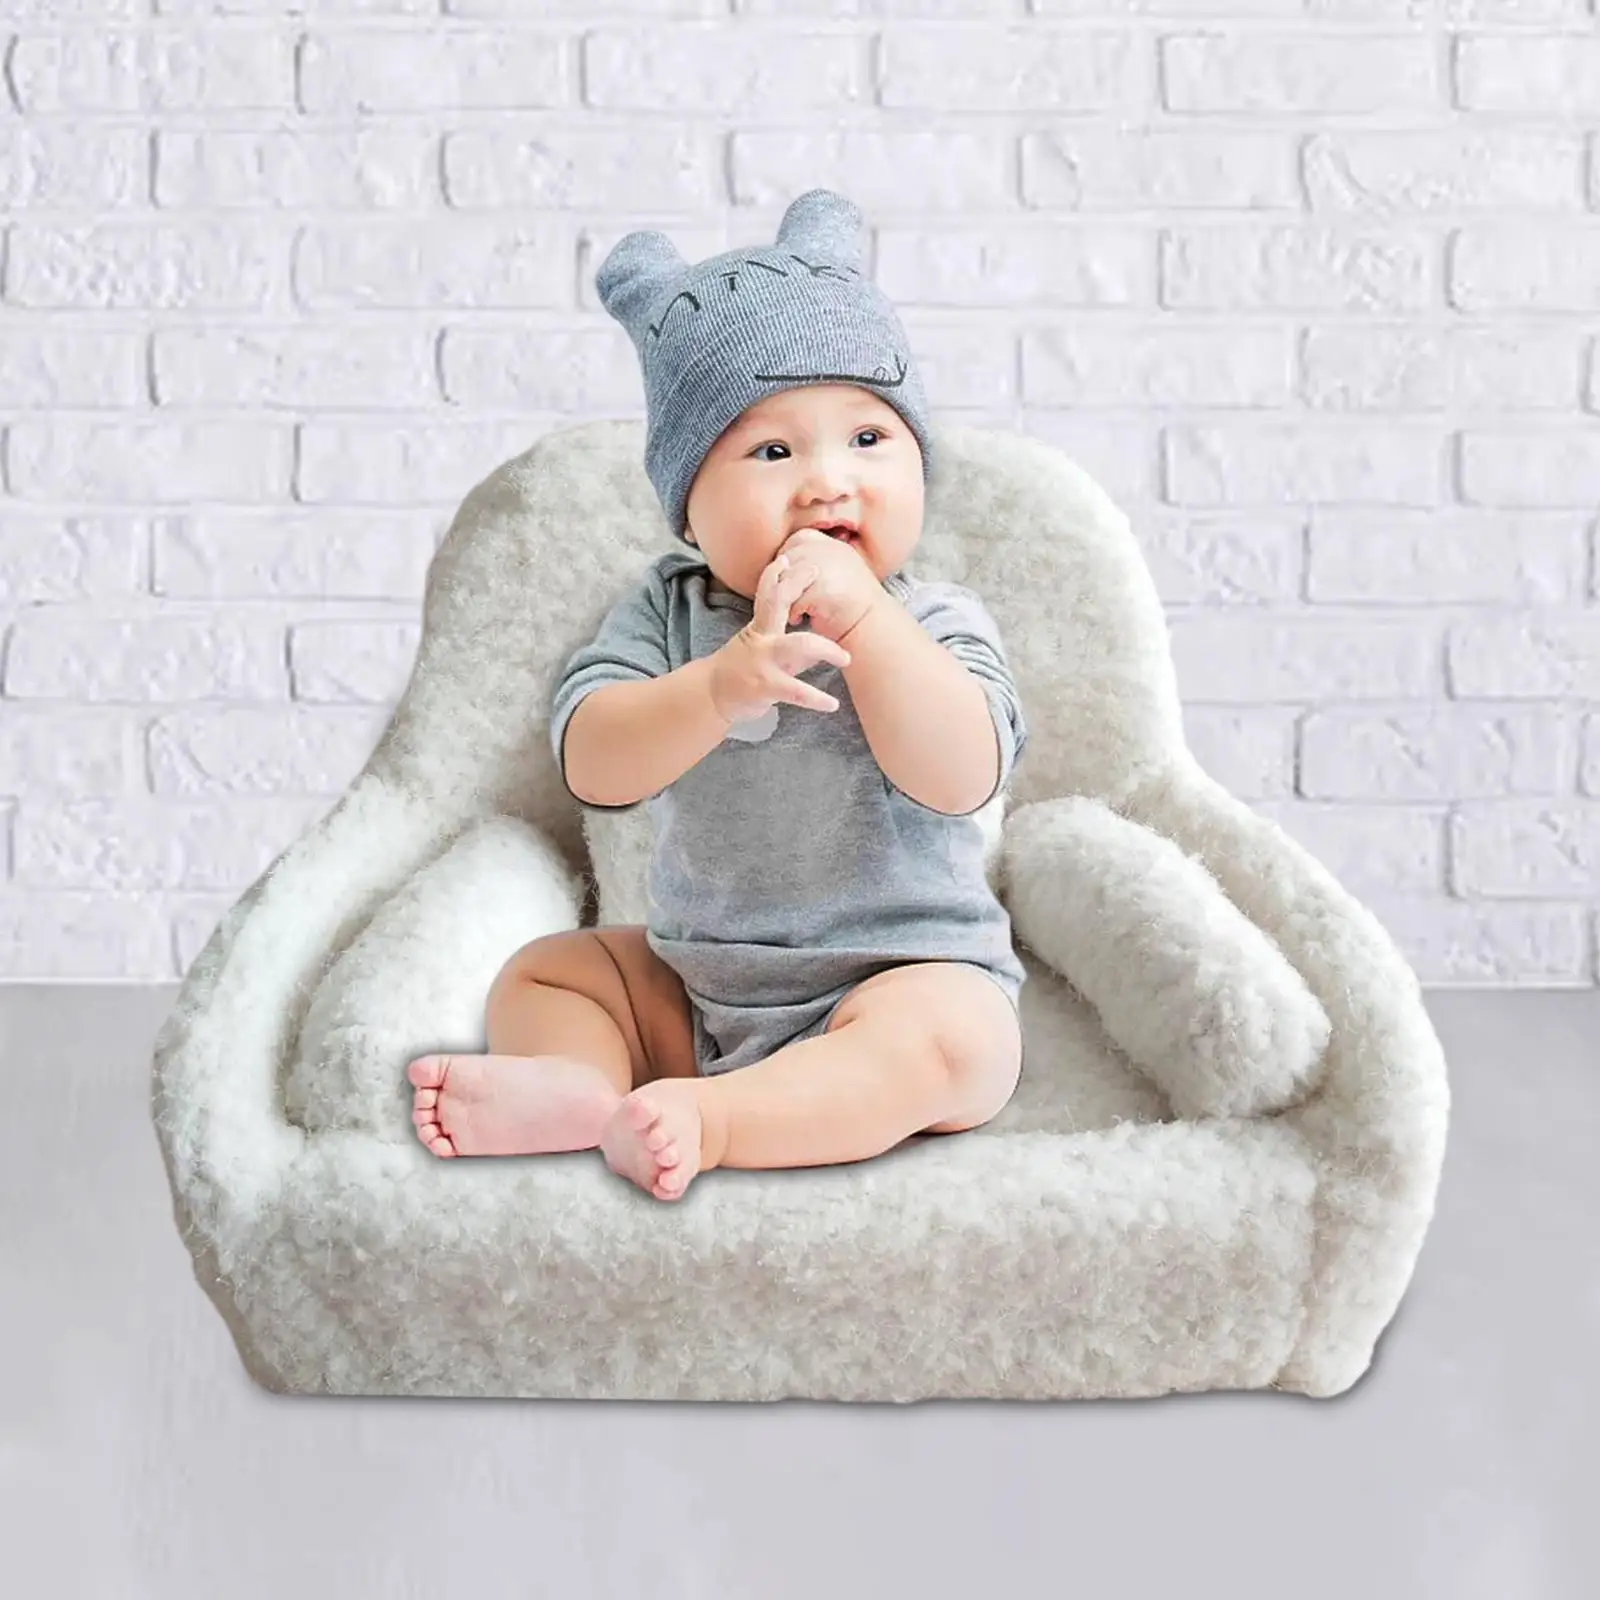 Baby Shooting Props Baby Posing Sofa Pillow Accessories for Photoshoot Baby